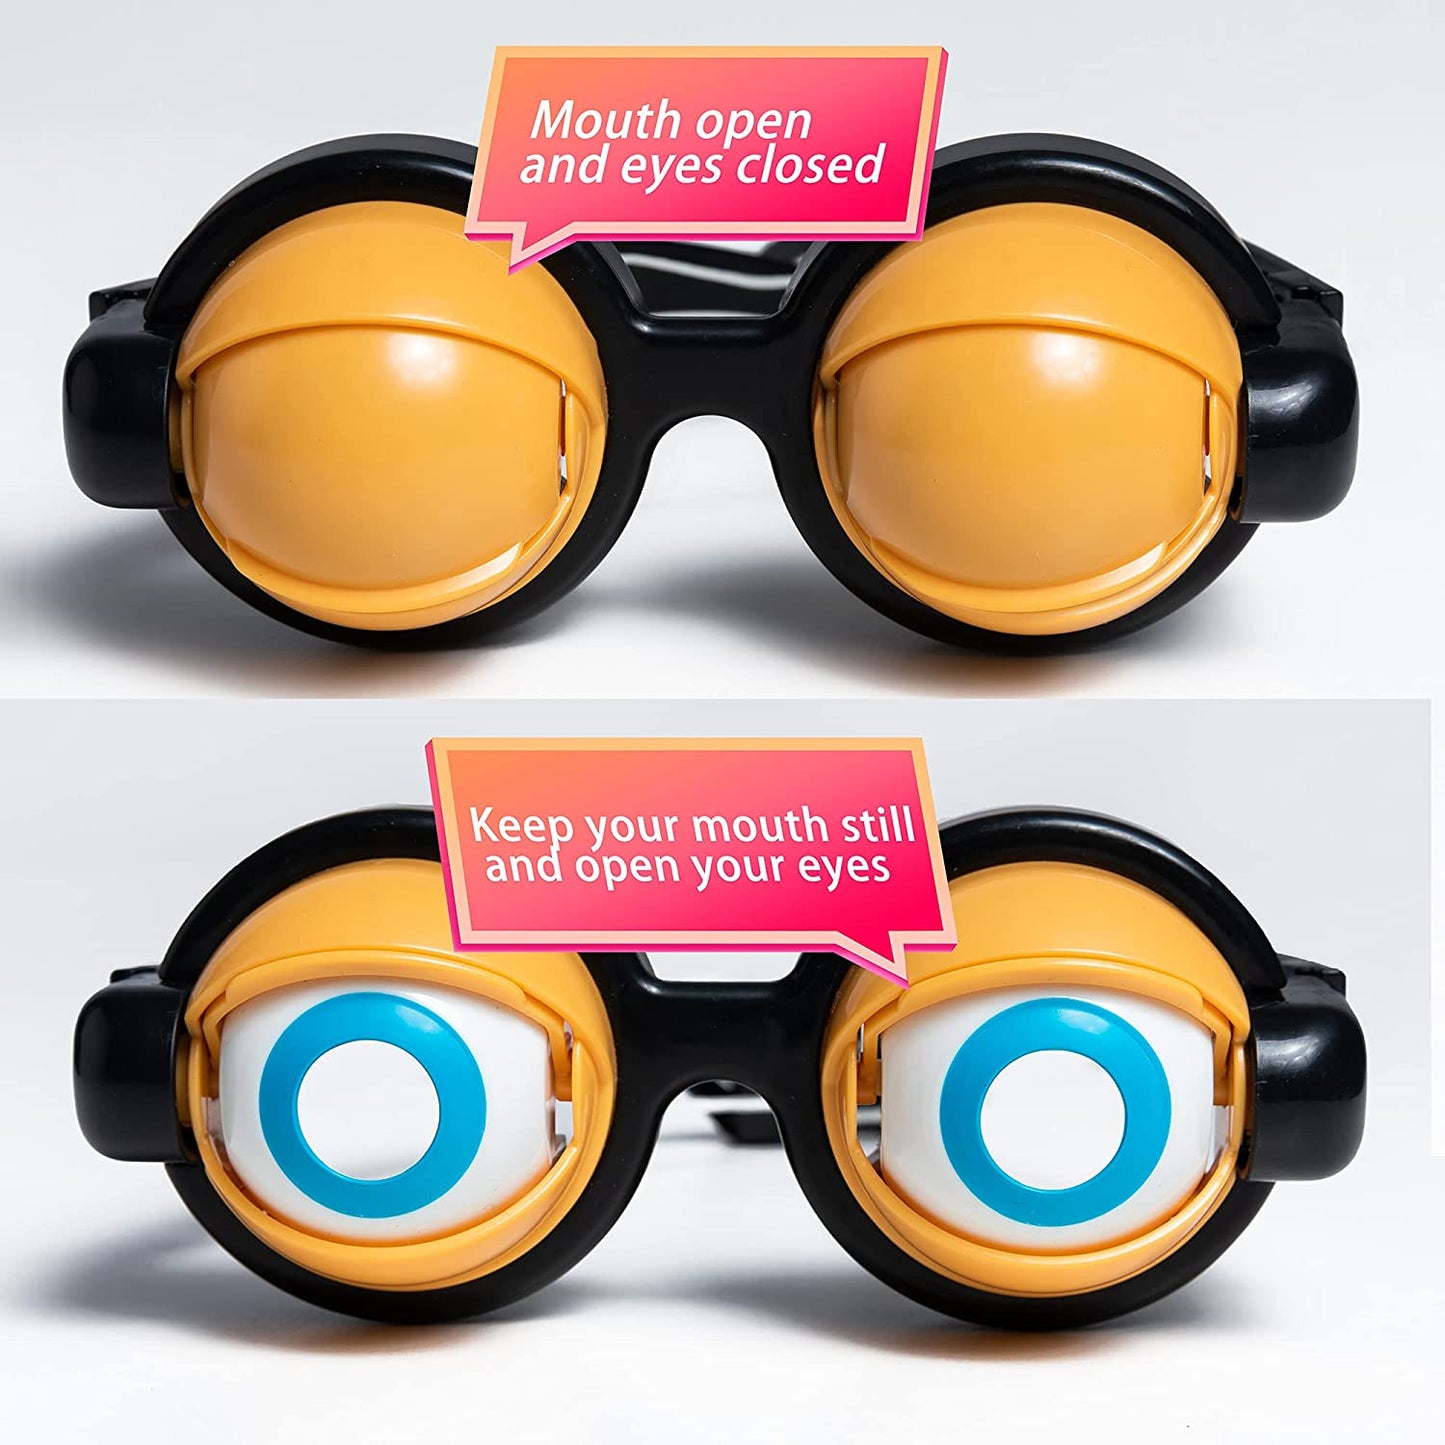 Oculos Loucos -Crazy Eyes Glasses Toy Kids Party Supplies Favor Funny Pranks Plastic Glasses For Christmas Birthday Gift Novelty Toys Kids Toys